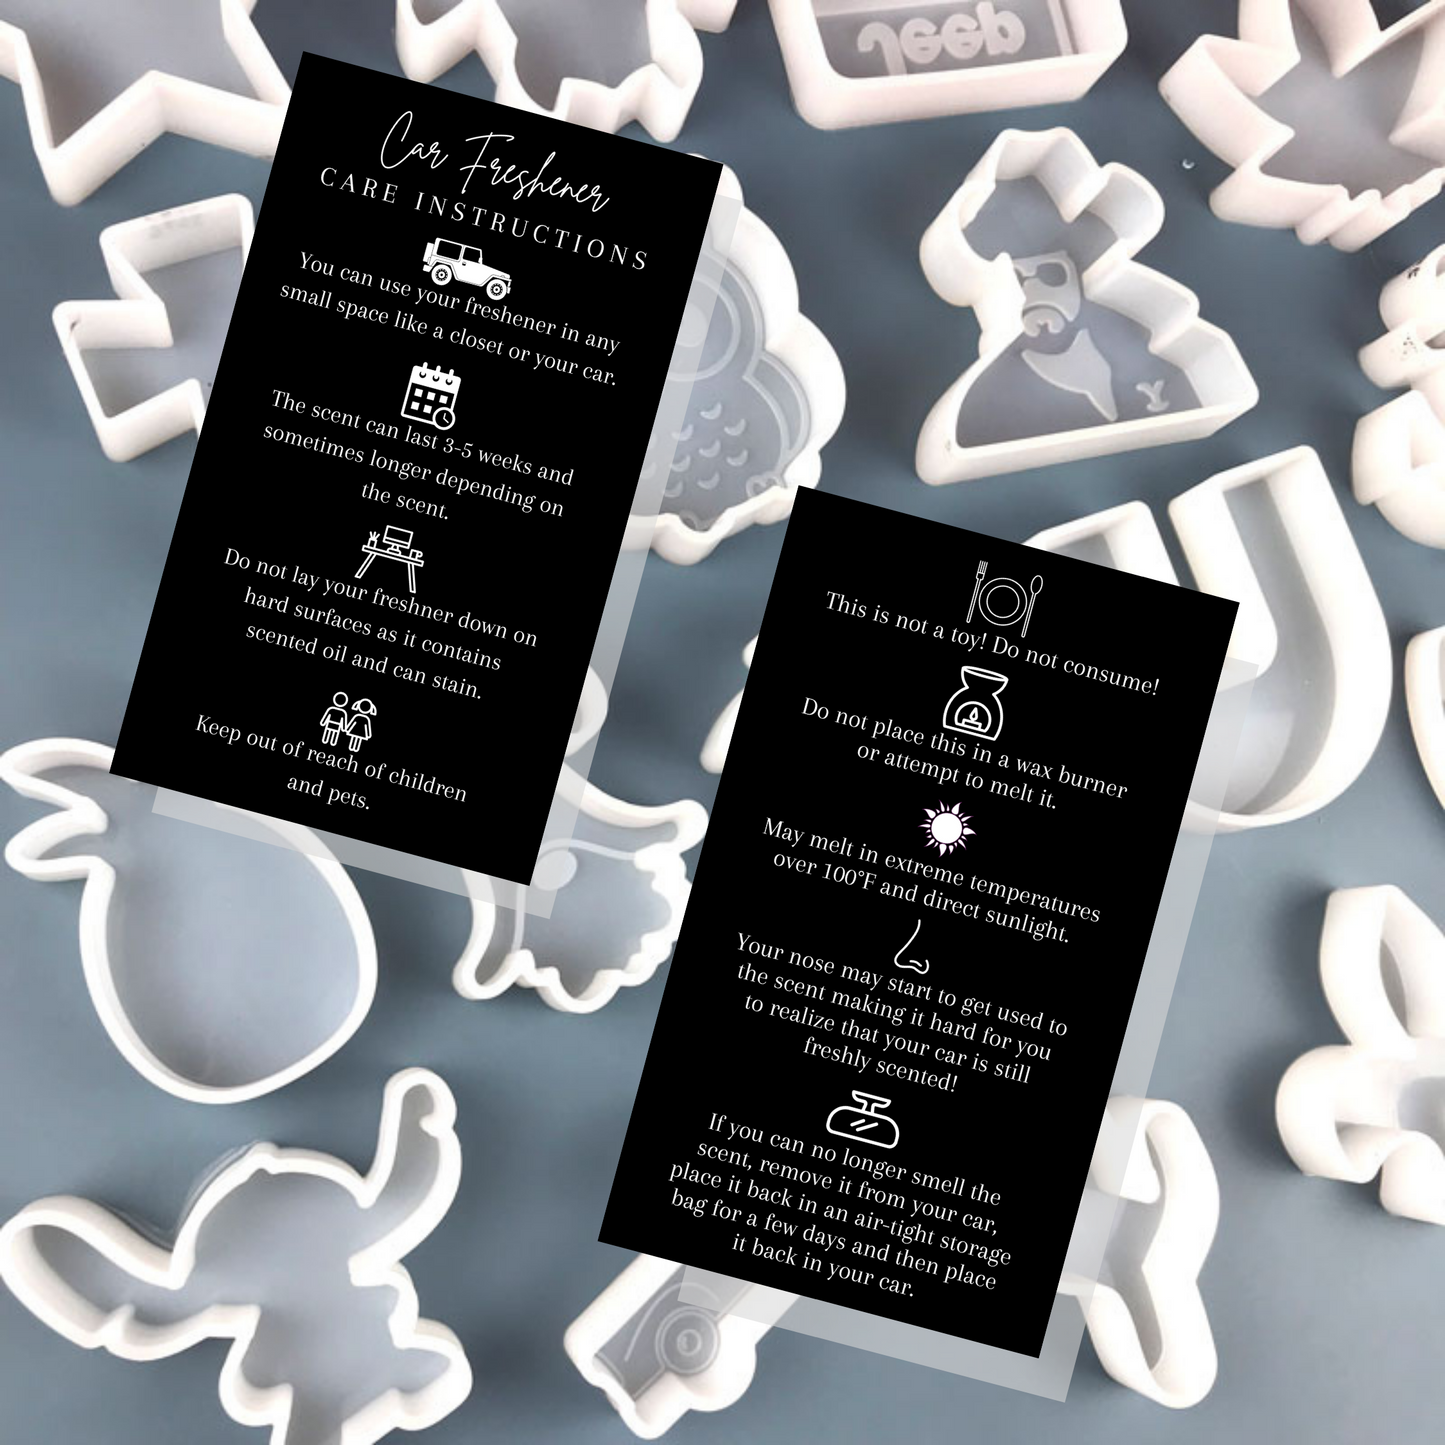 Car Freshie Care Instruction Cards | 2x3.5" inches Business Card